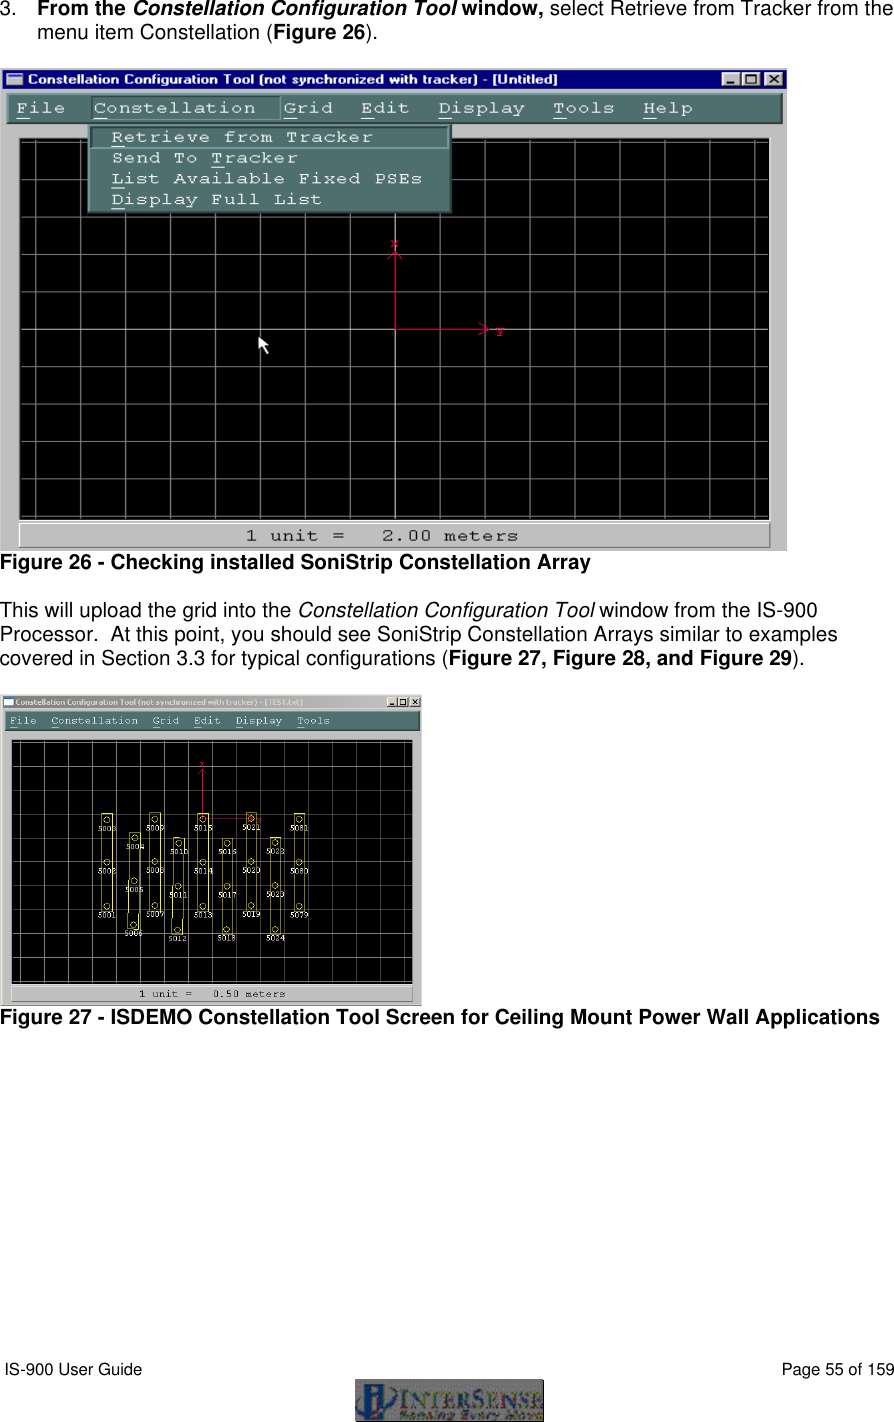  IS-900 User Guide                                                                                                                                          Page 55 of 159  3. From the Constellation Configuration Tool window, select Retrieve from Tracker from the menu item Constellation (Figure 26).   Figure 26 - Checking installed SoniStrip Constellation Array  This will upload the grid into the Constellation Configuration Tool window from the IS-900 Processor.  At this point, you should see SoniStrip Constellation Arrays similar to examples covered in Section 3.3 for typical configurations (Figure 27, Figure 28, and Figure 29).   Figure 27 - ISDEMO Constellation Tool Screen for Ceiling Mount Power Wall Applications  